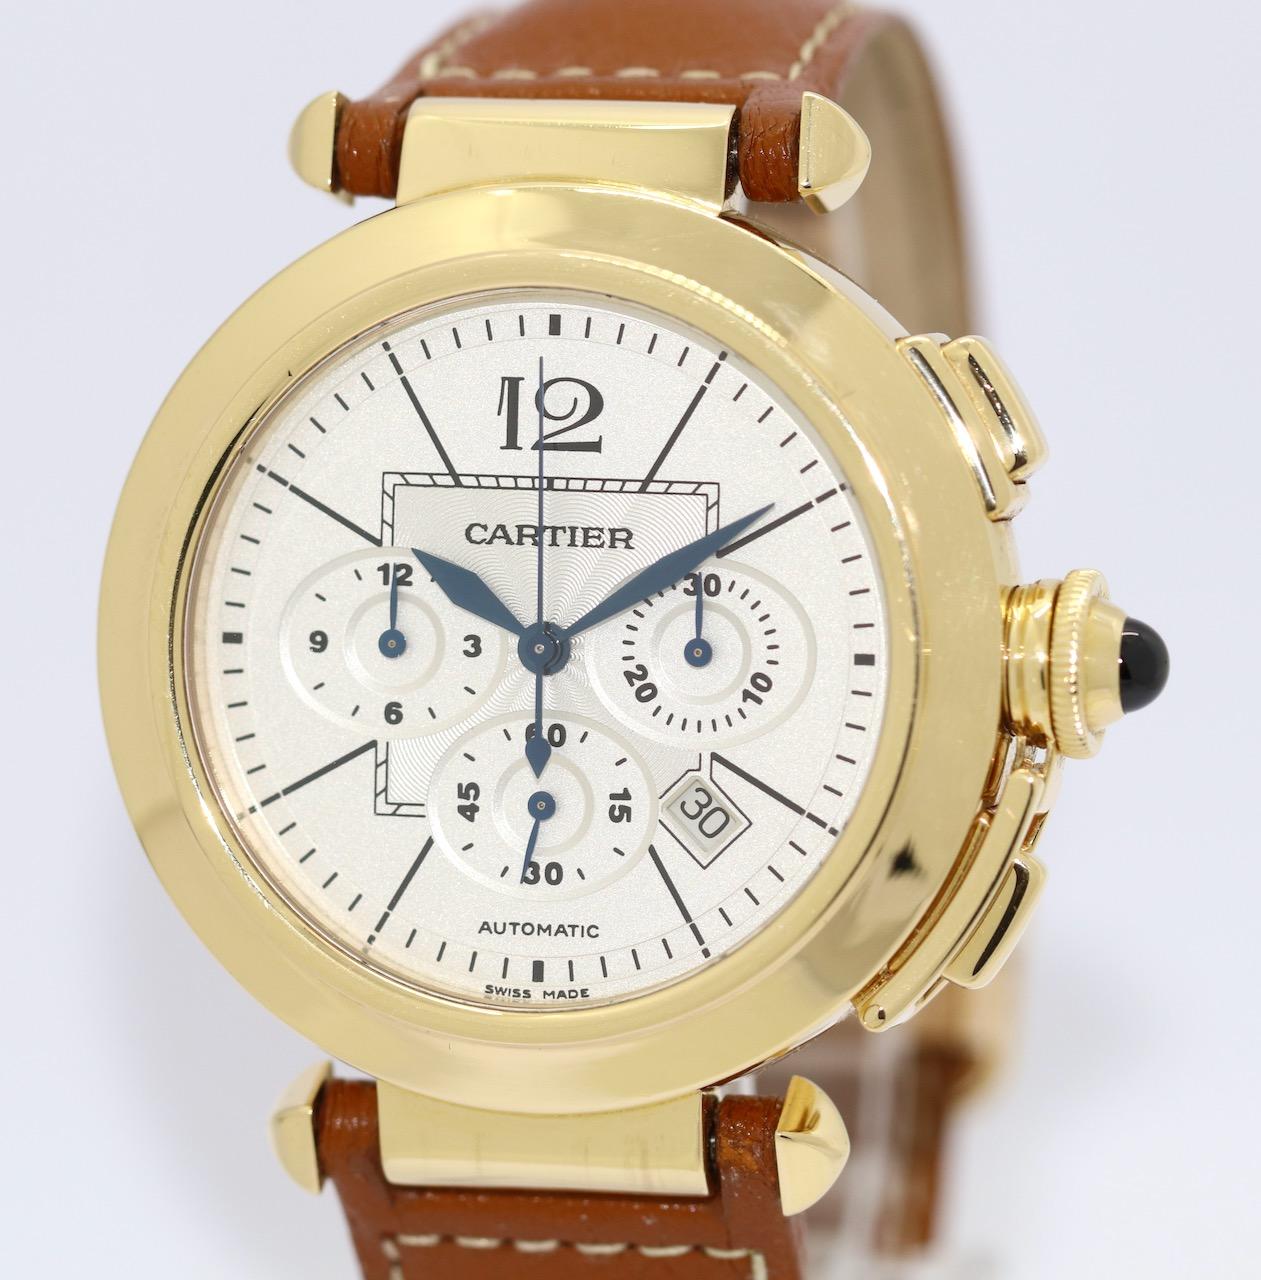 Beautiful and modern Cartier Pasha Automatic Chronograph 18 Karat Gold.
Diameter without crown 42mm

Case and Clasp 18 Karat solid Gold.

Including certificate of authenticity.